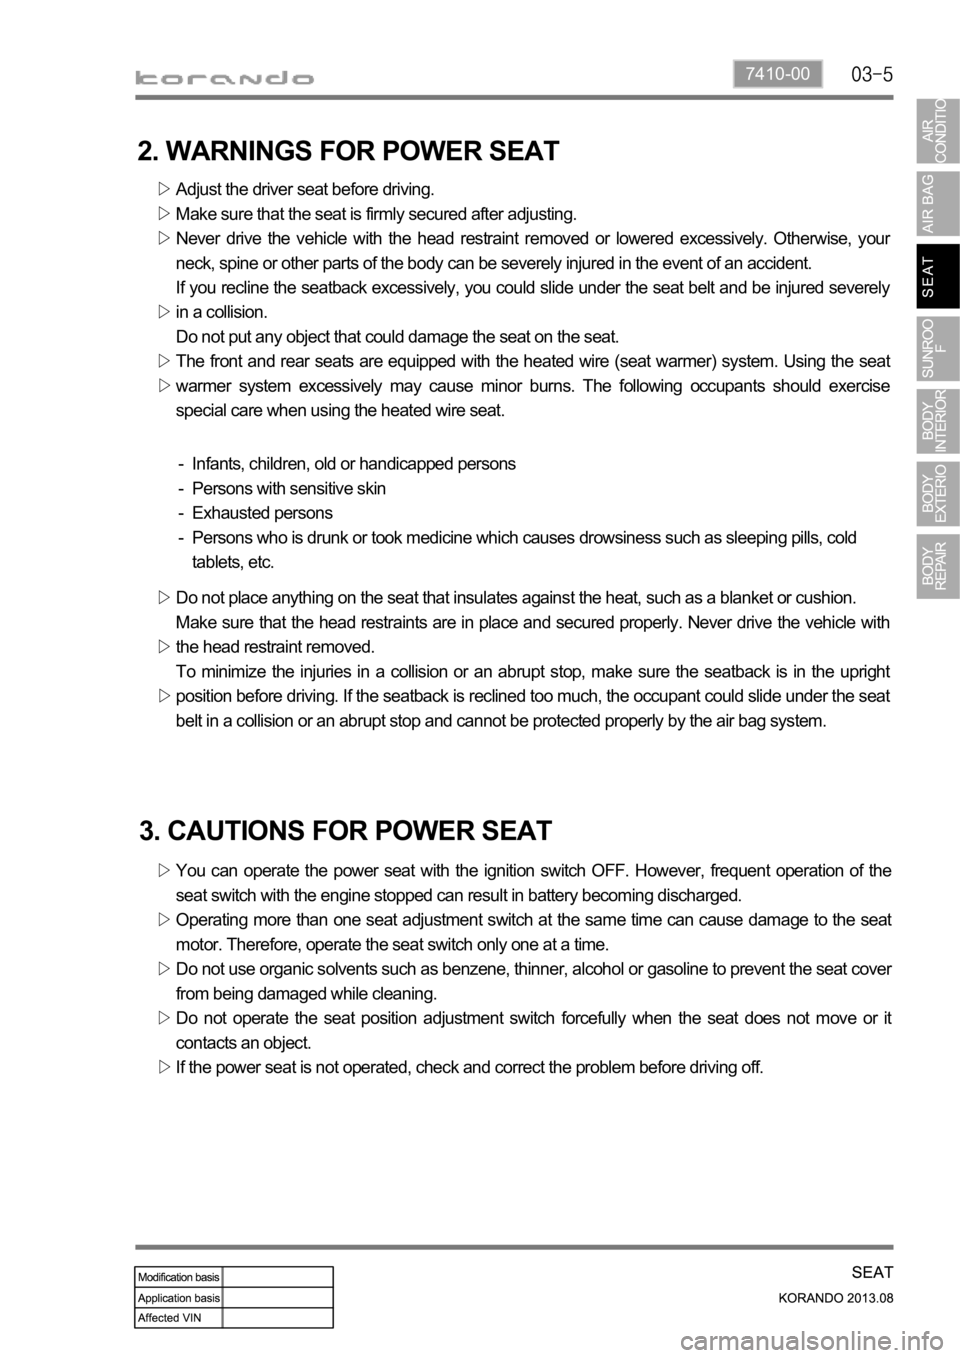 SSANGYONG KORANDO 2013  Service Manual 7410-00
2. WARNINGS FOR POWER SEAT
Adjust the driver seat before driving.
Make sure that the seat is firmly secured after adjusting.
Never  drive  the  vehicle  with  the  head  restraint  removed  or